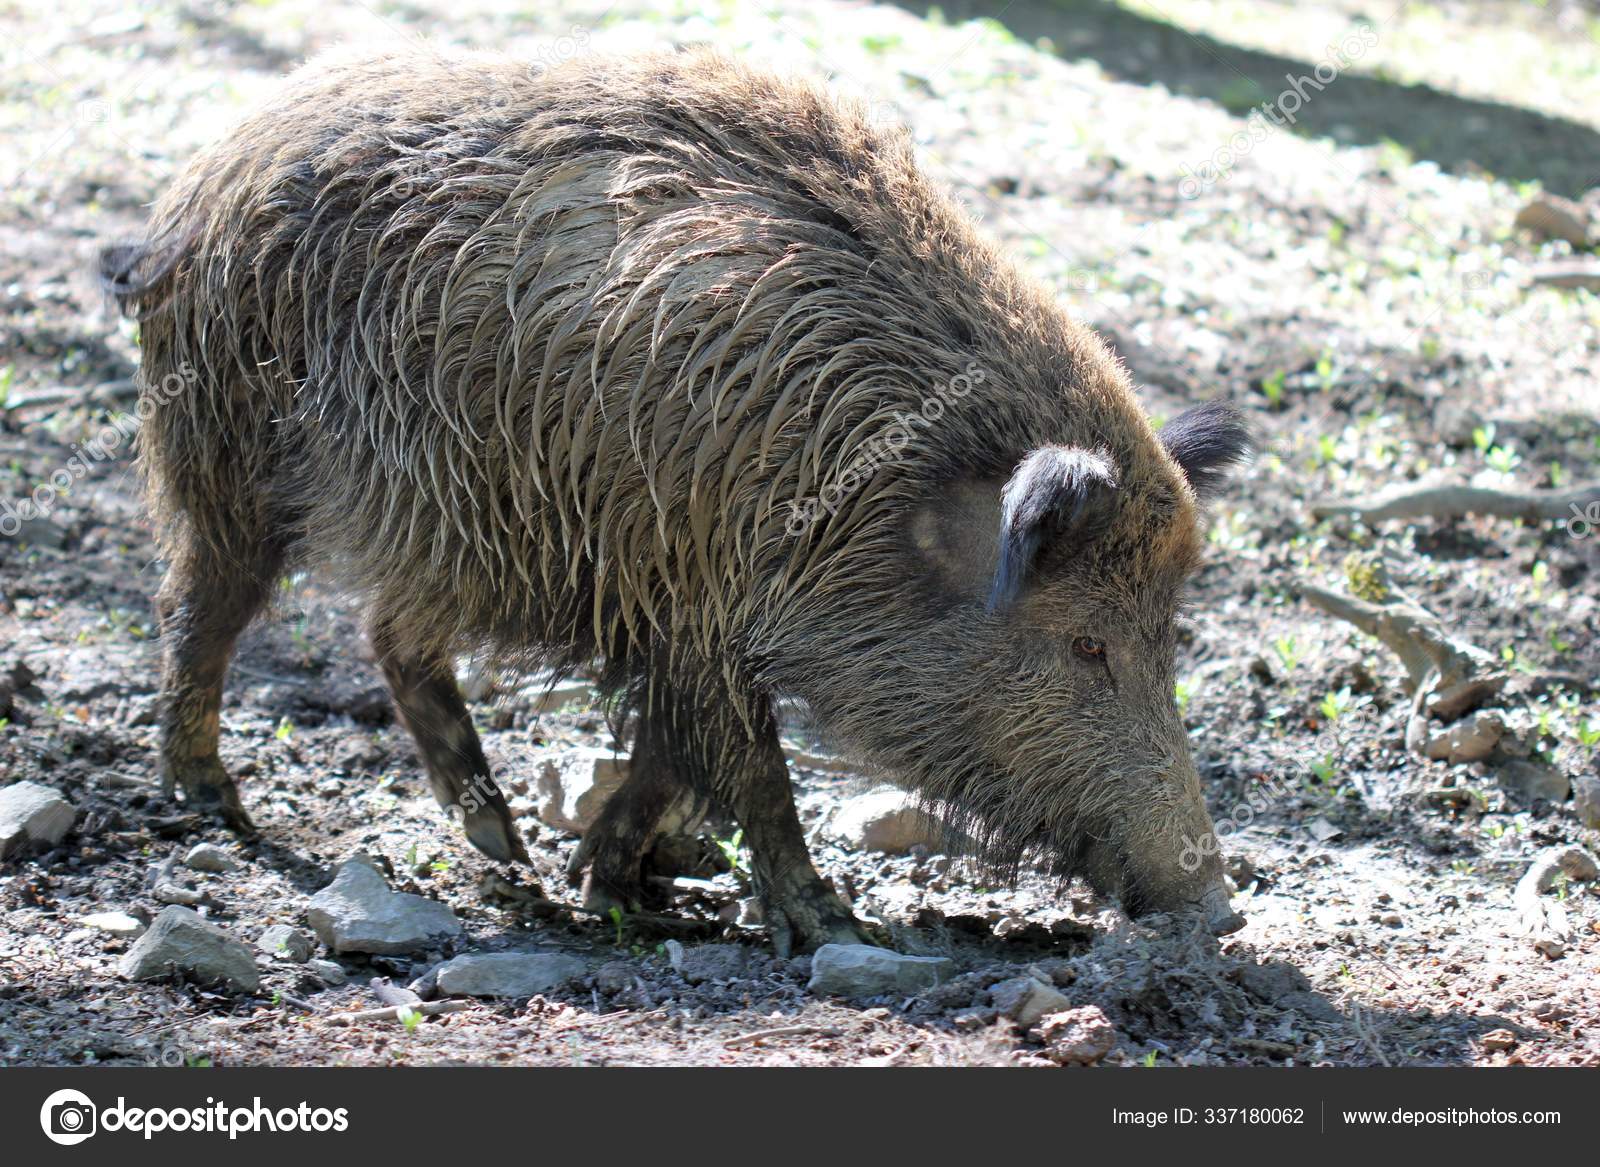 Wild boars in the mud Stock Photos, Royalty Free Wild boars in the mud  Images | Depositphotos